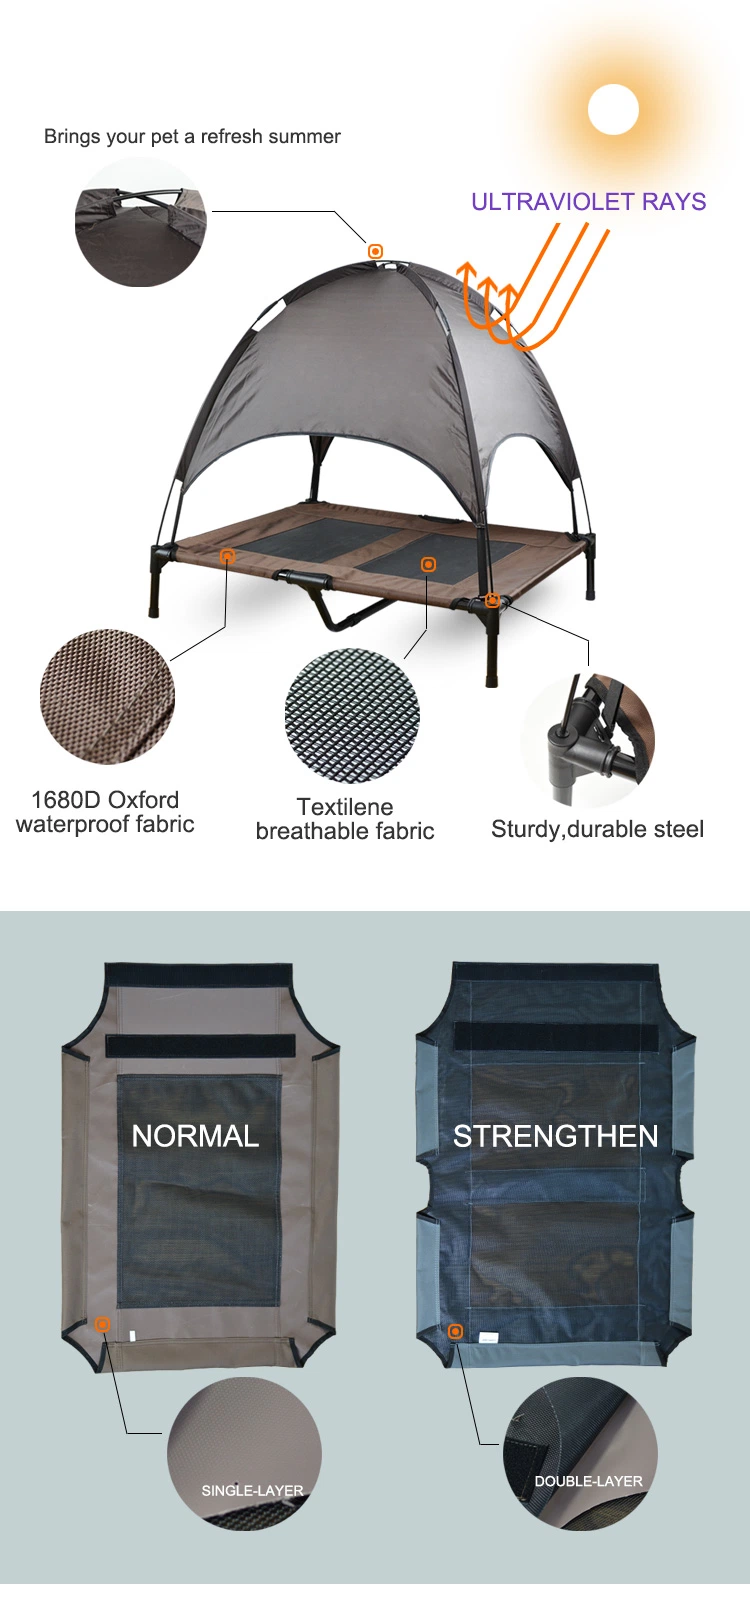 Outdoor Travel Dog Beds Elevated Pet Cot with Canopy Pet Carrier Dog Beds &amp; Accessories for Camping